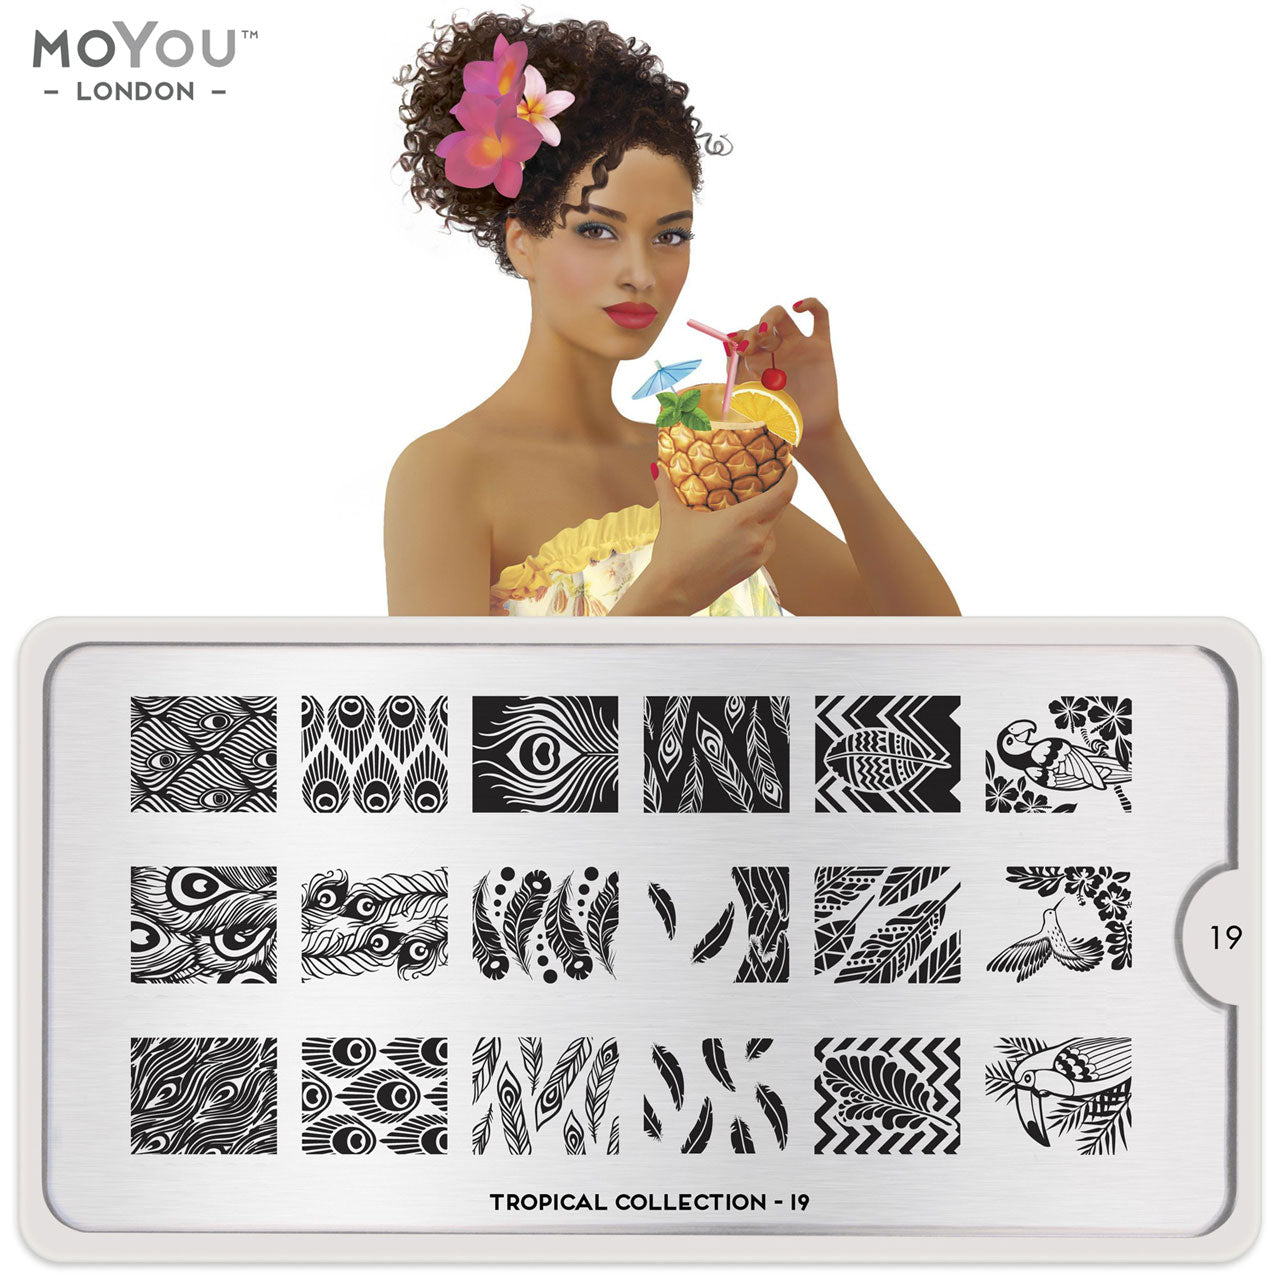 Plaque Stamping Tropical 19 - MoYou London